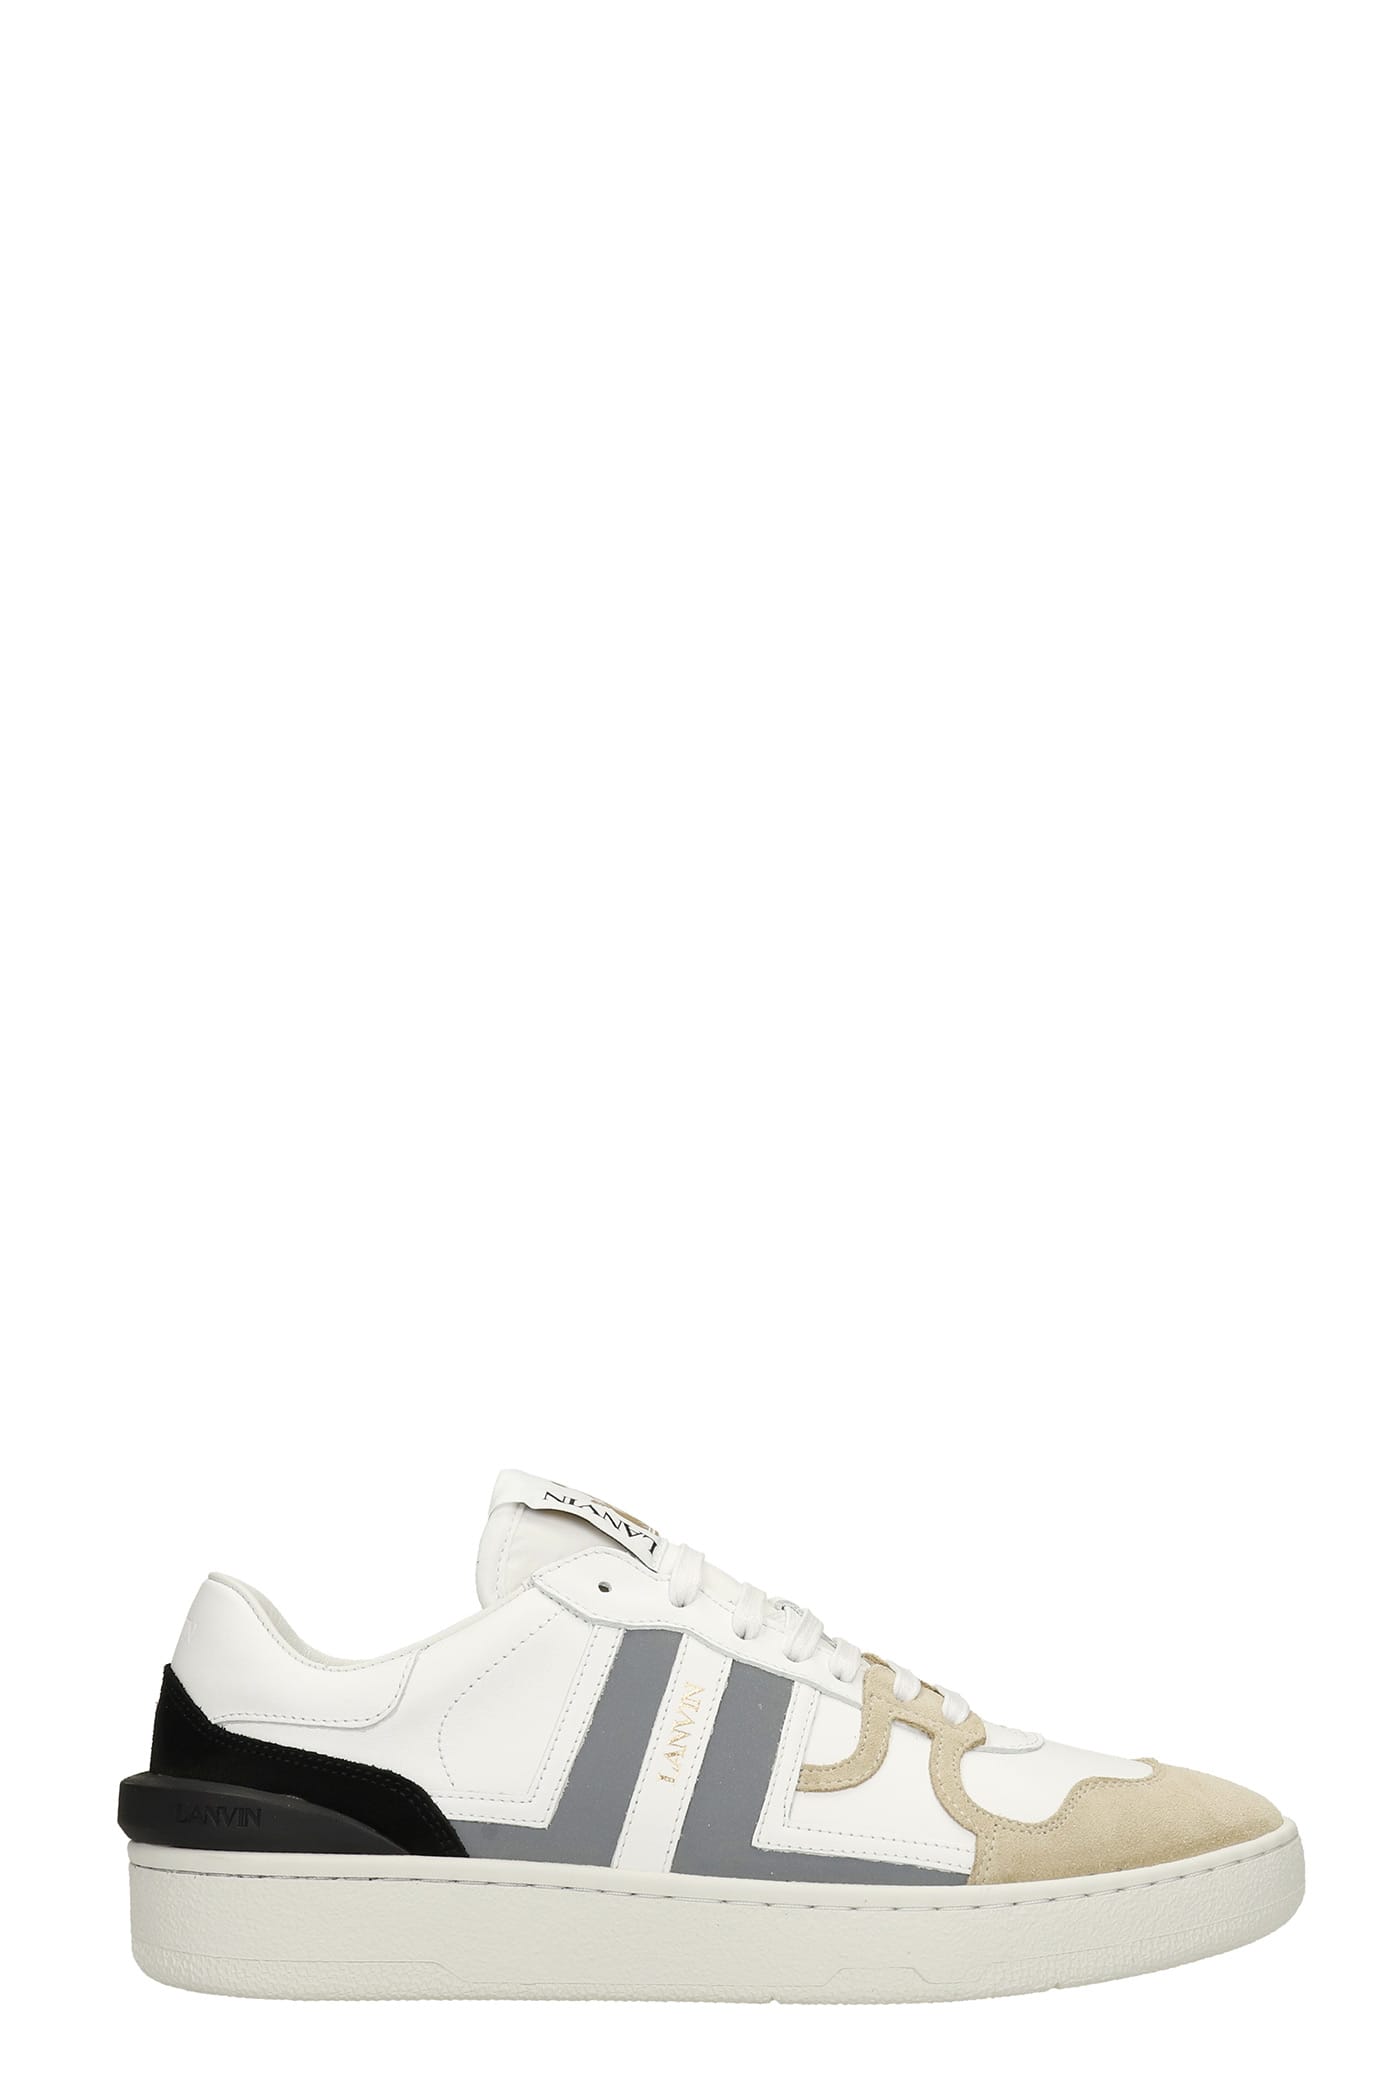 Lanvin Clay Sneakers In White Leather